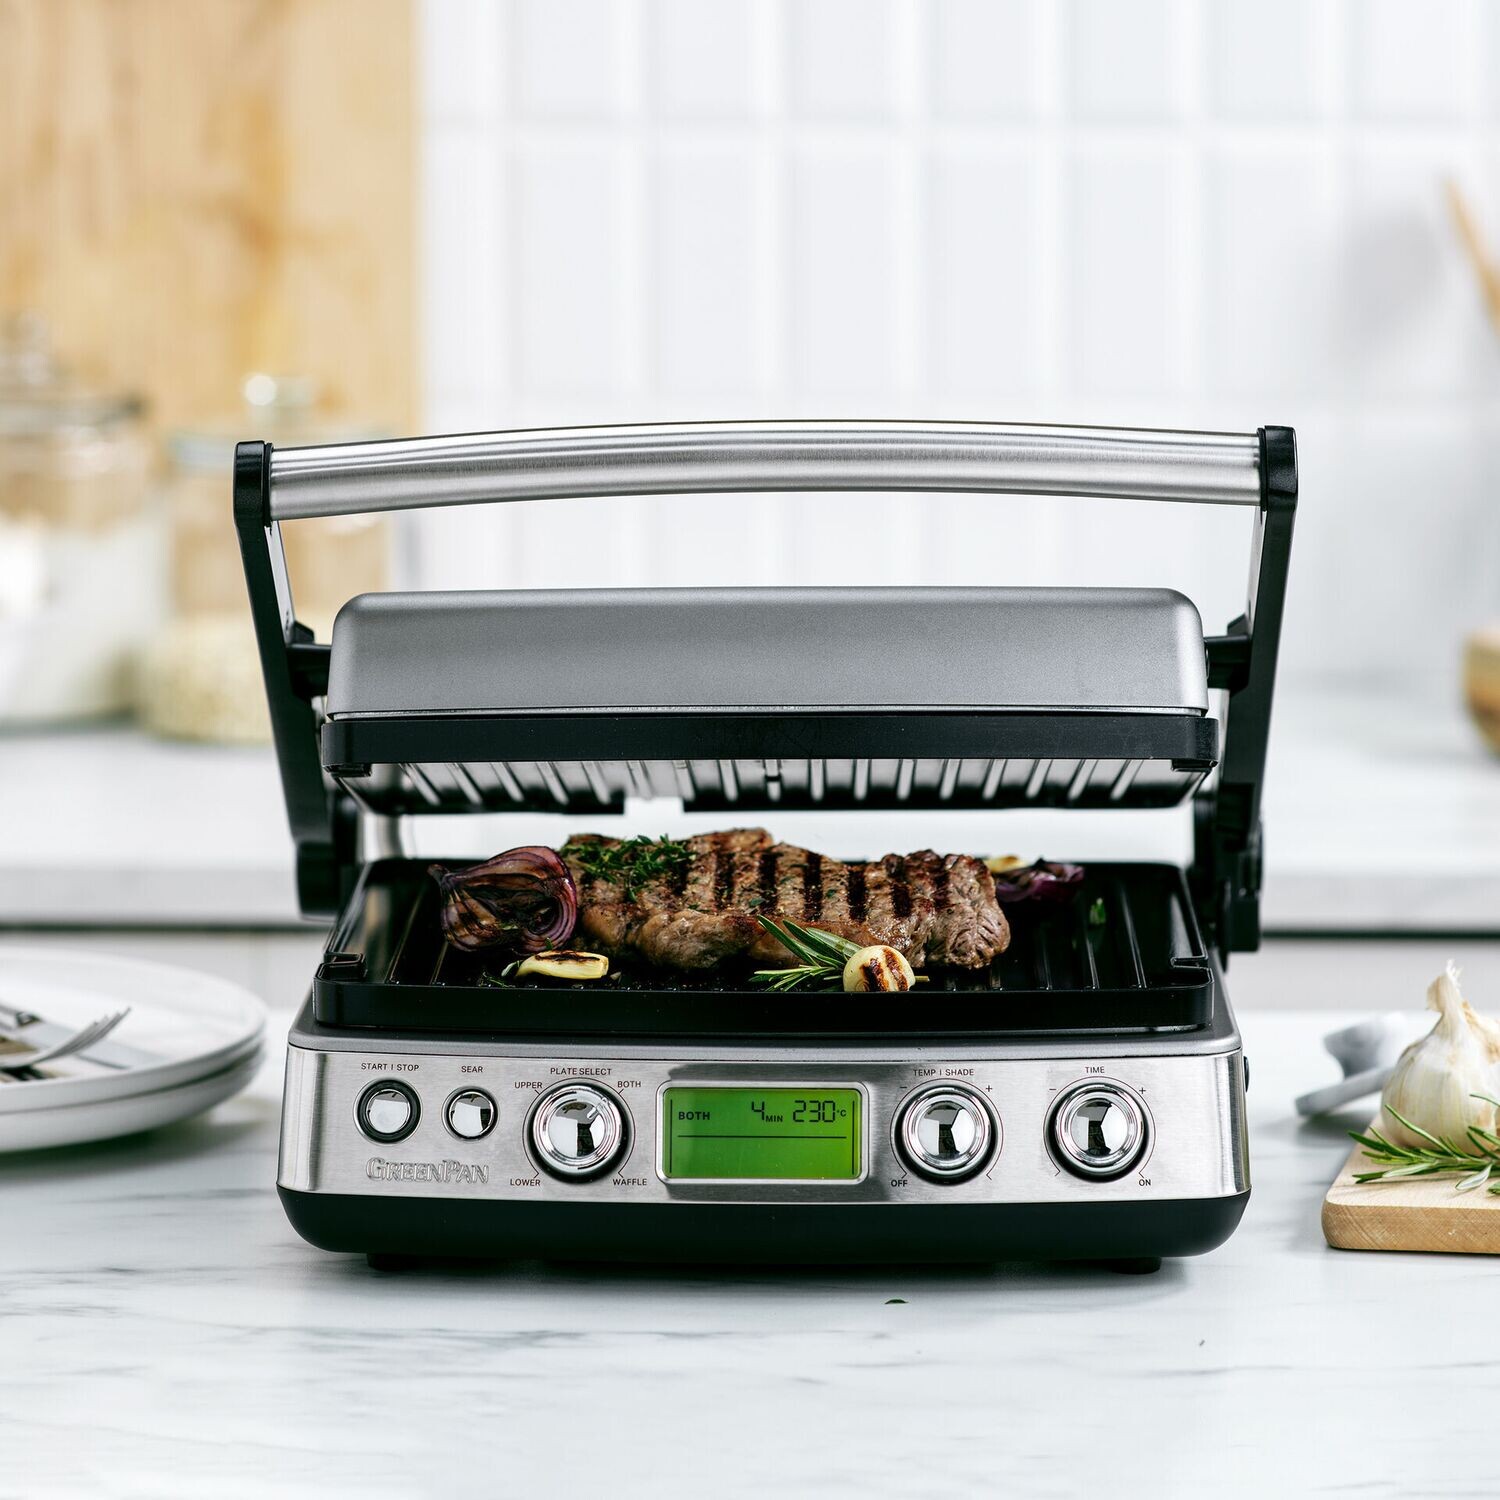 Greenpan Contactgrill Stainless Steel